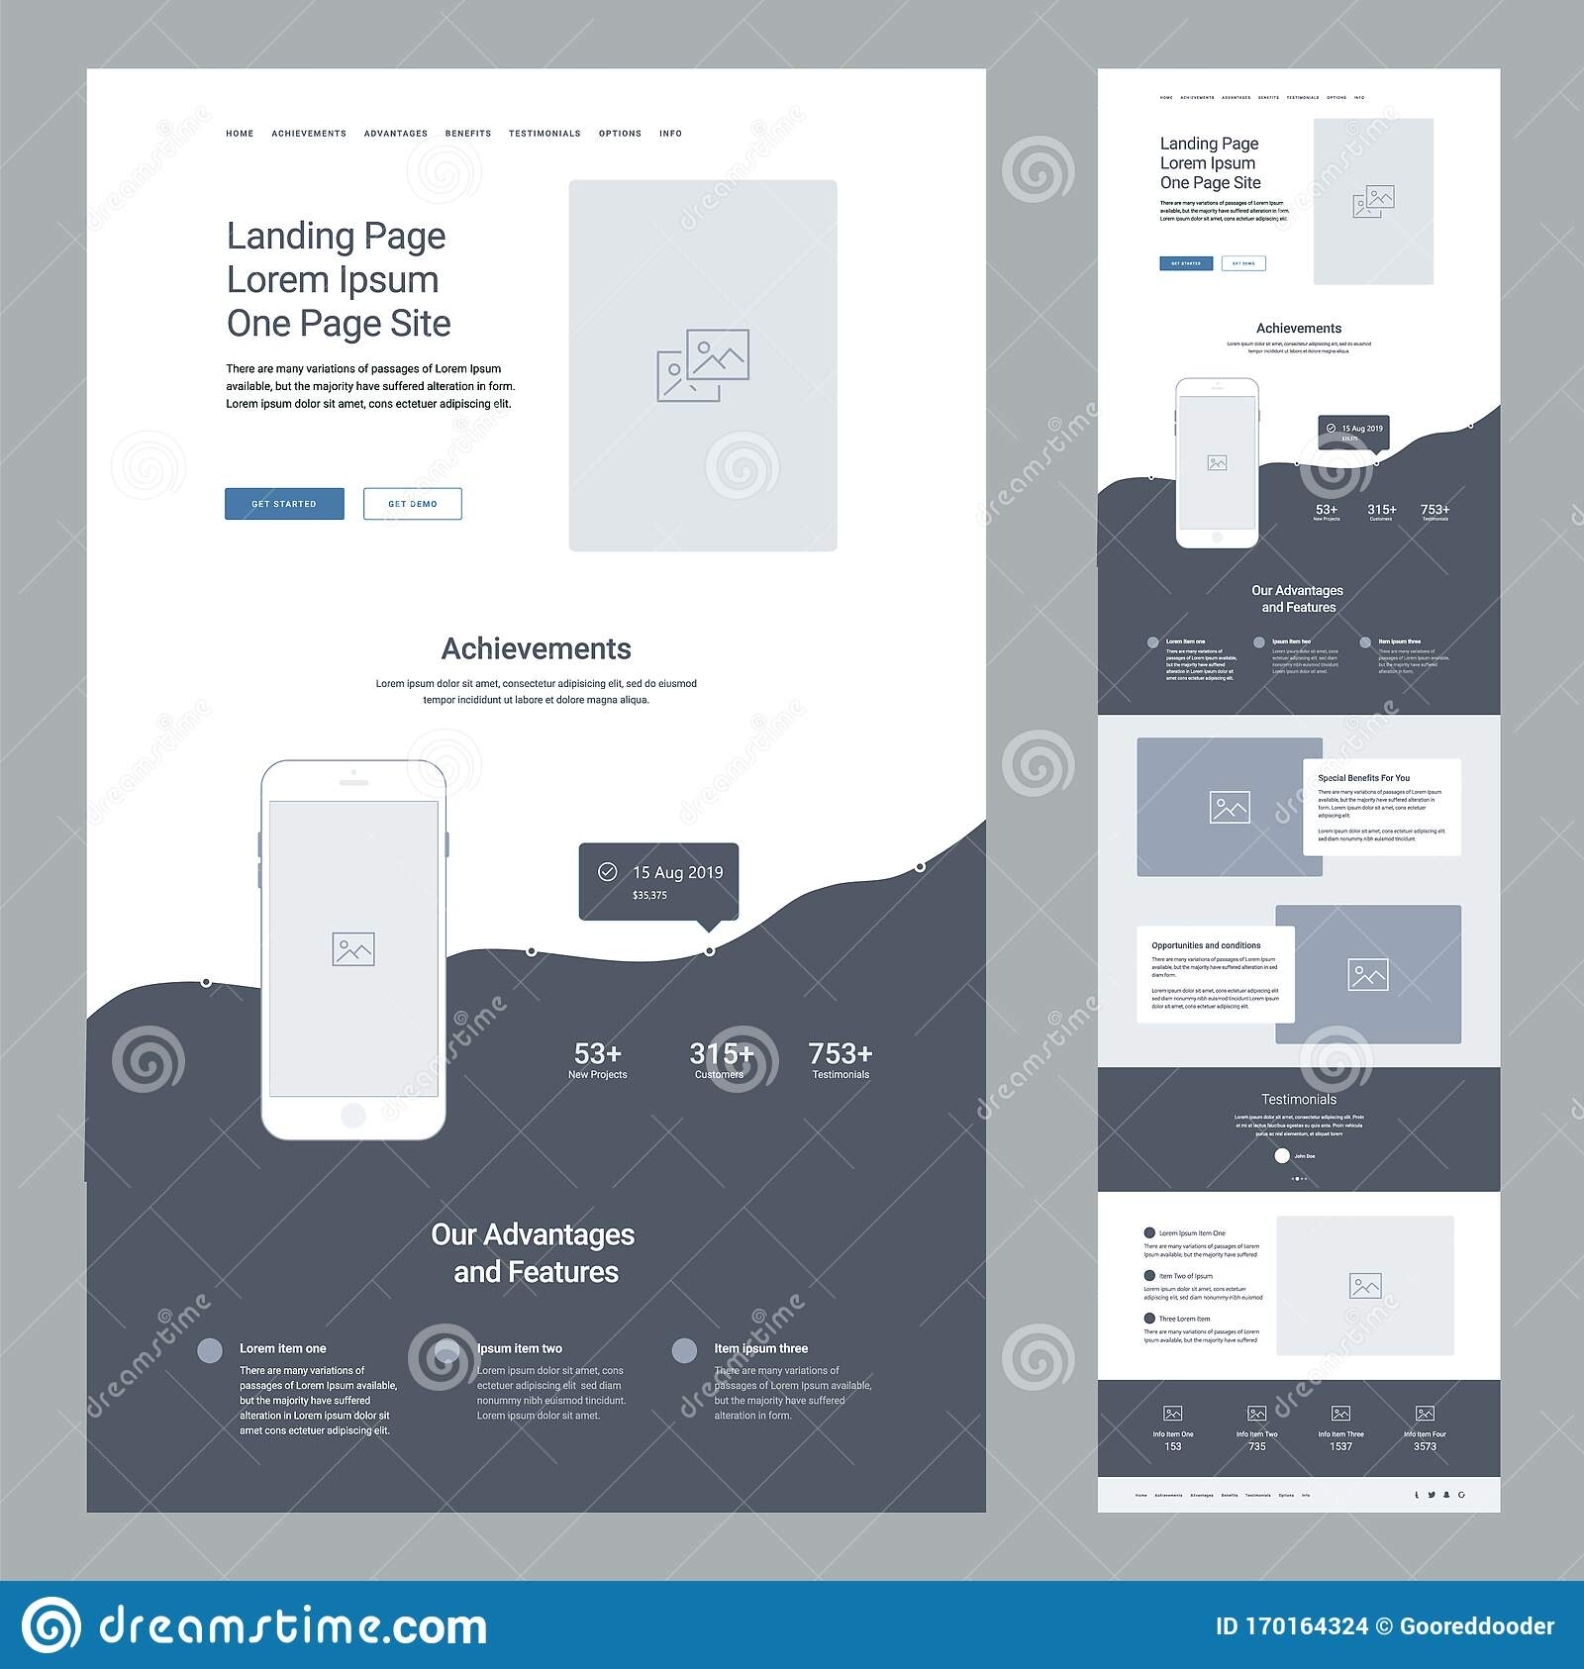 Landing Page Design Template For Business. One Page Website Wireframe within One Page Business Website Template